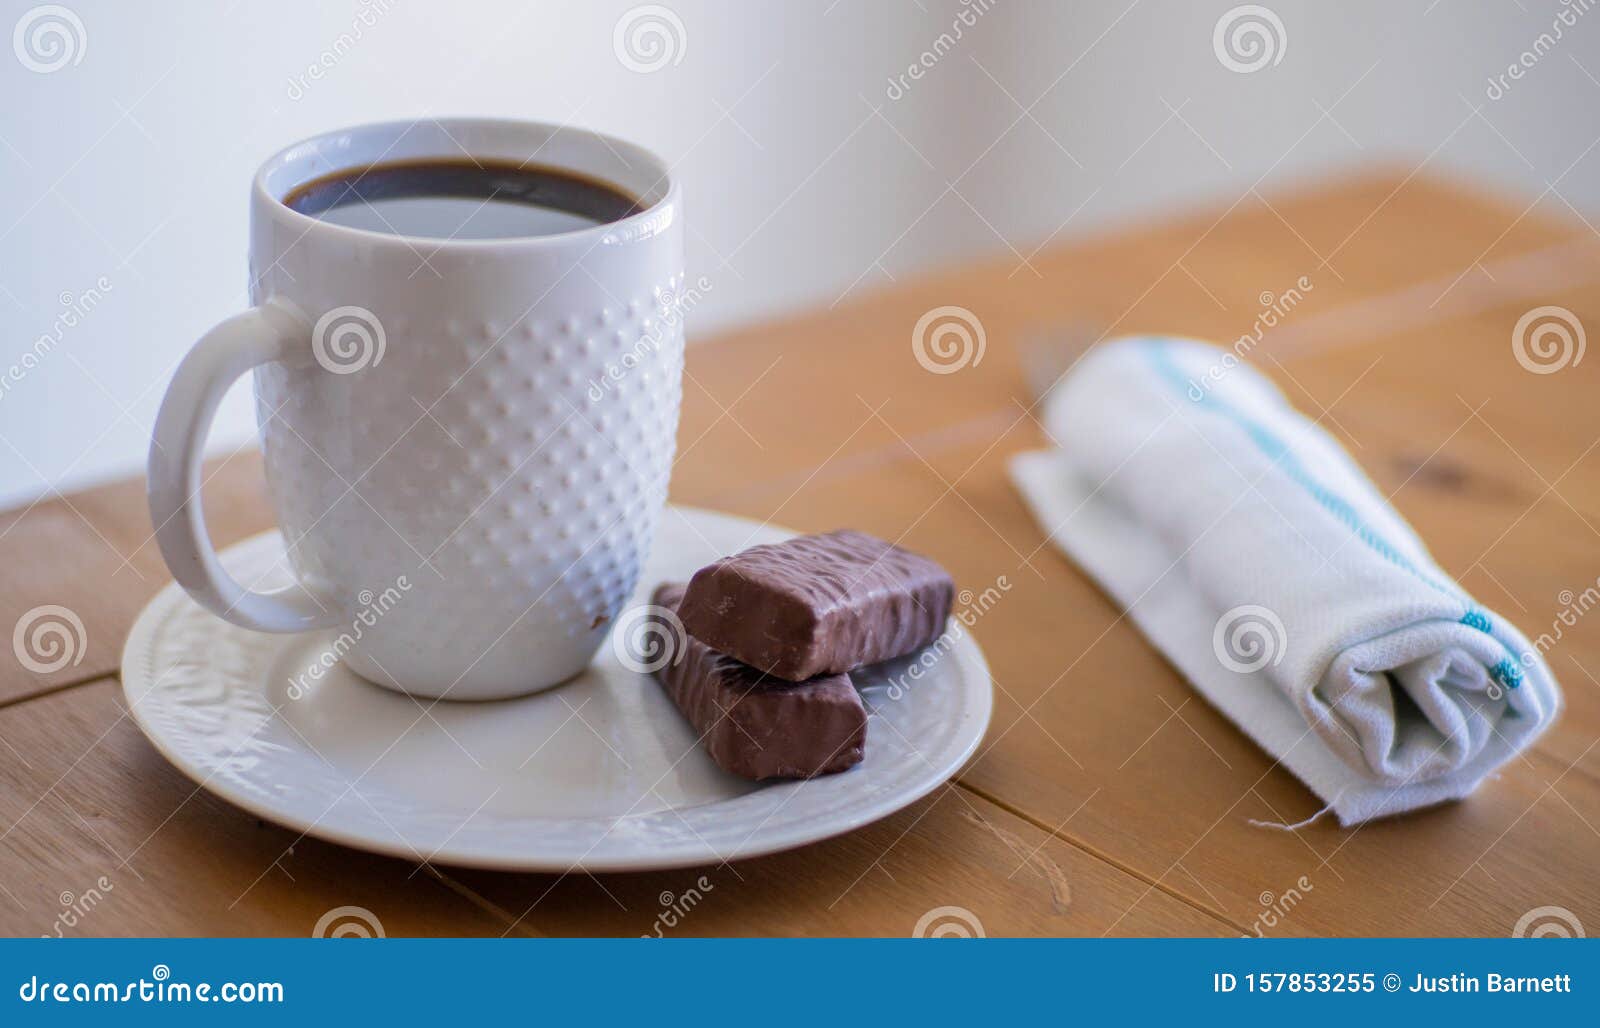 Coffee Cup with Snack - Top Down Stock Image - Image of break, coffee ...